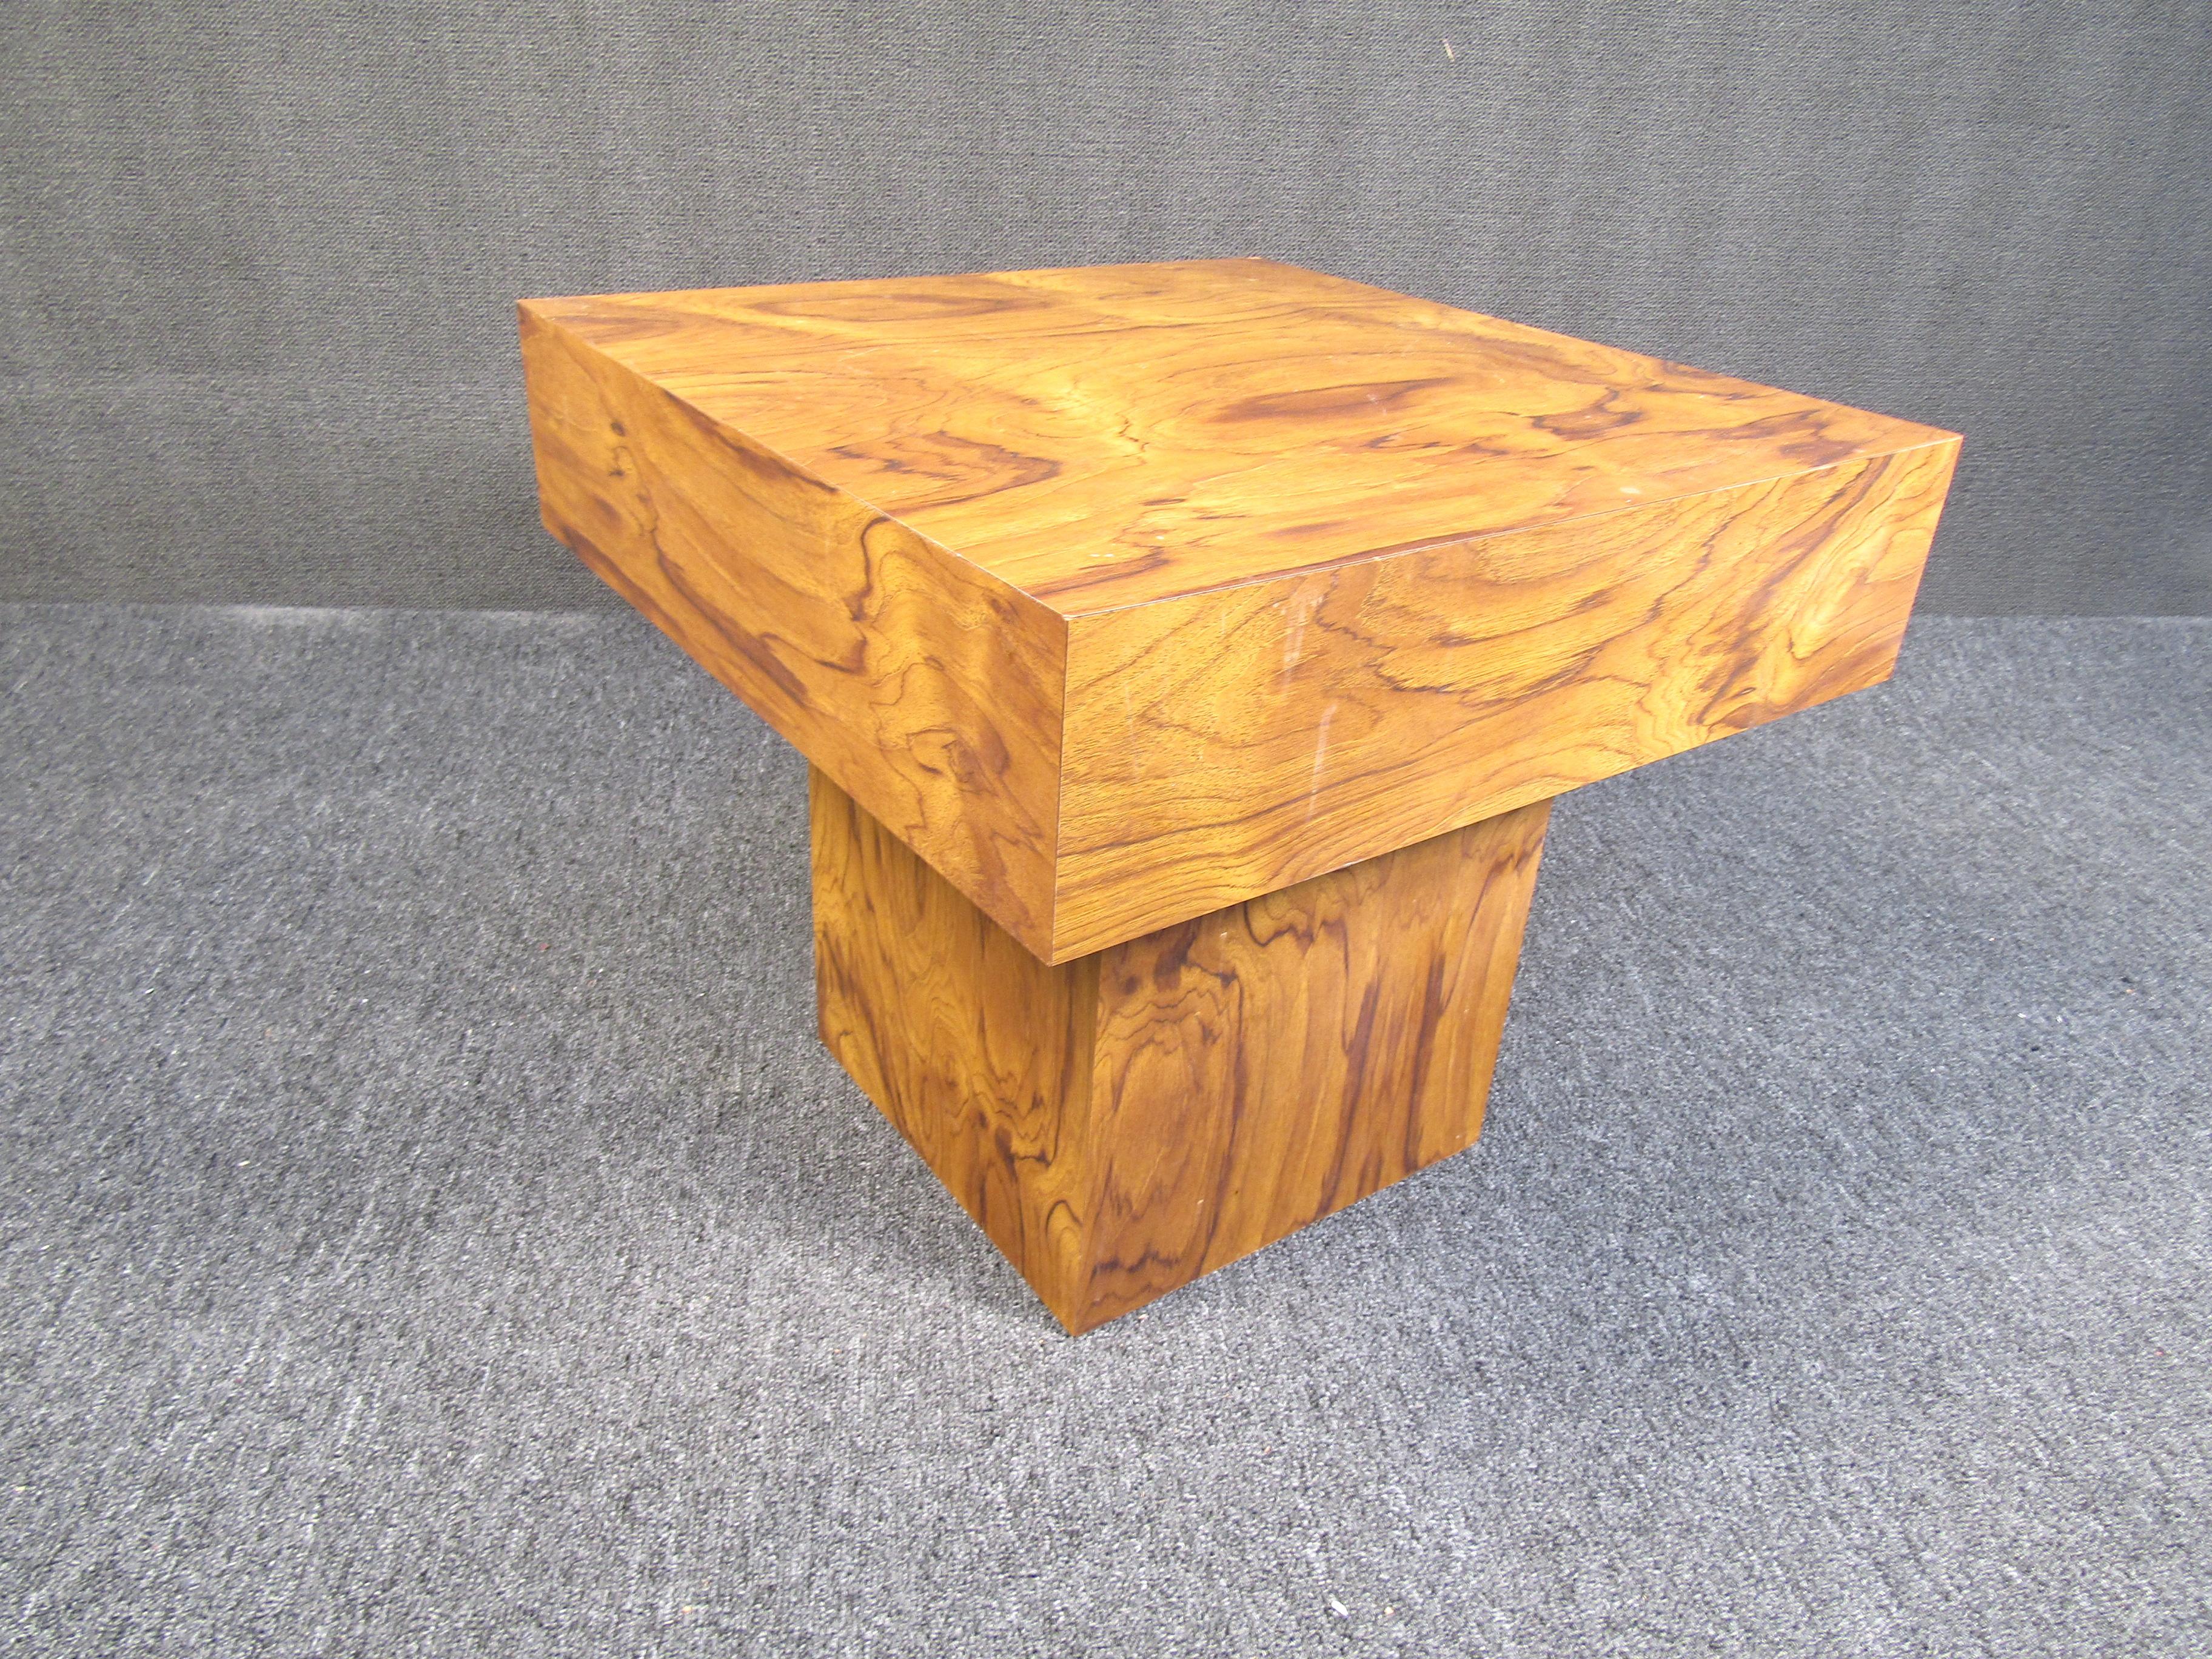 This charming walnut table is perfect for either a small coffee table or a side table. Featuring beautiful dark grain walnut wood and a single leg design. Very sturdy in construction this piece will be a valued possession for years to come. Please